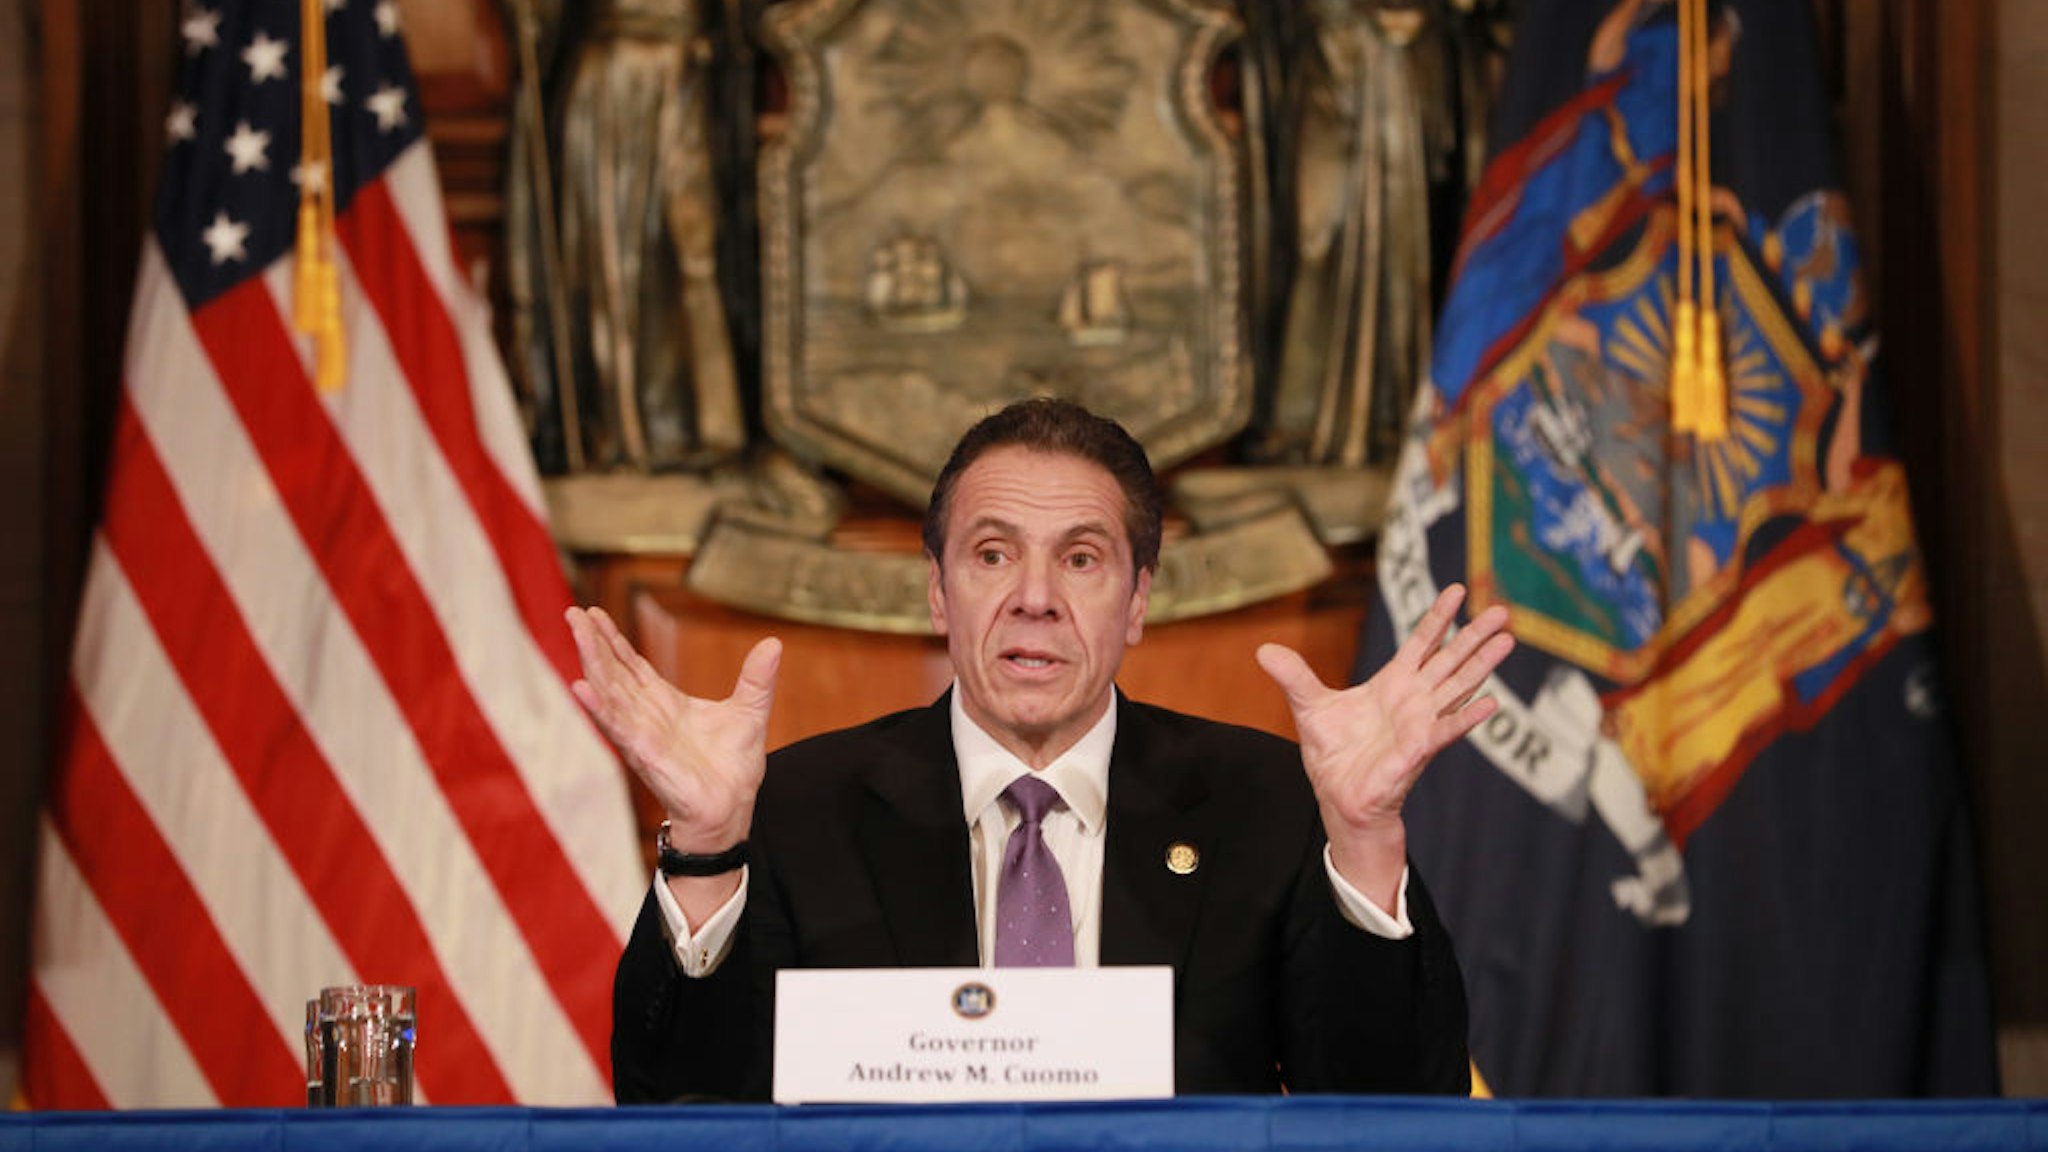 New York Governor Andrew Cuomo gives his a press briefing about the coronavirus crisis on April 17, 2020 in Albany, New York.